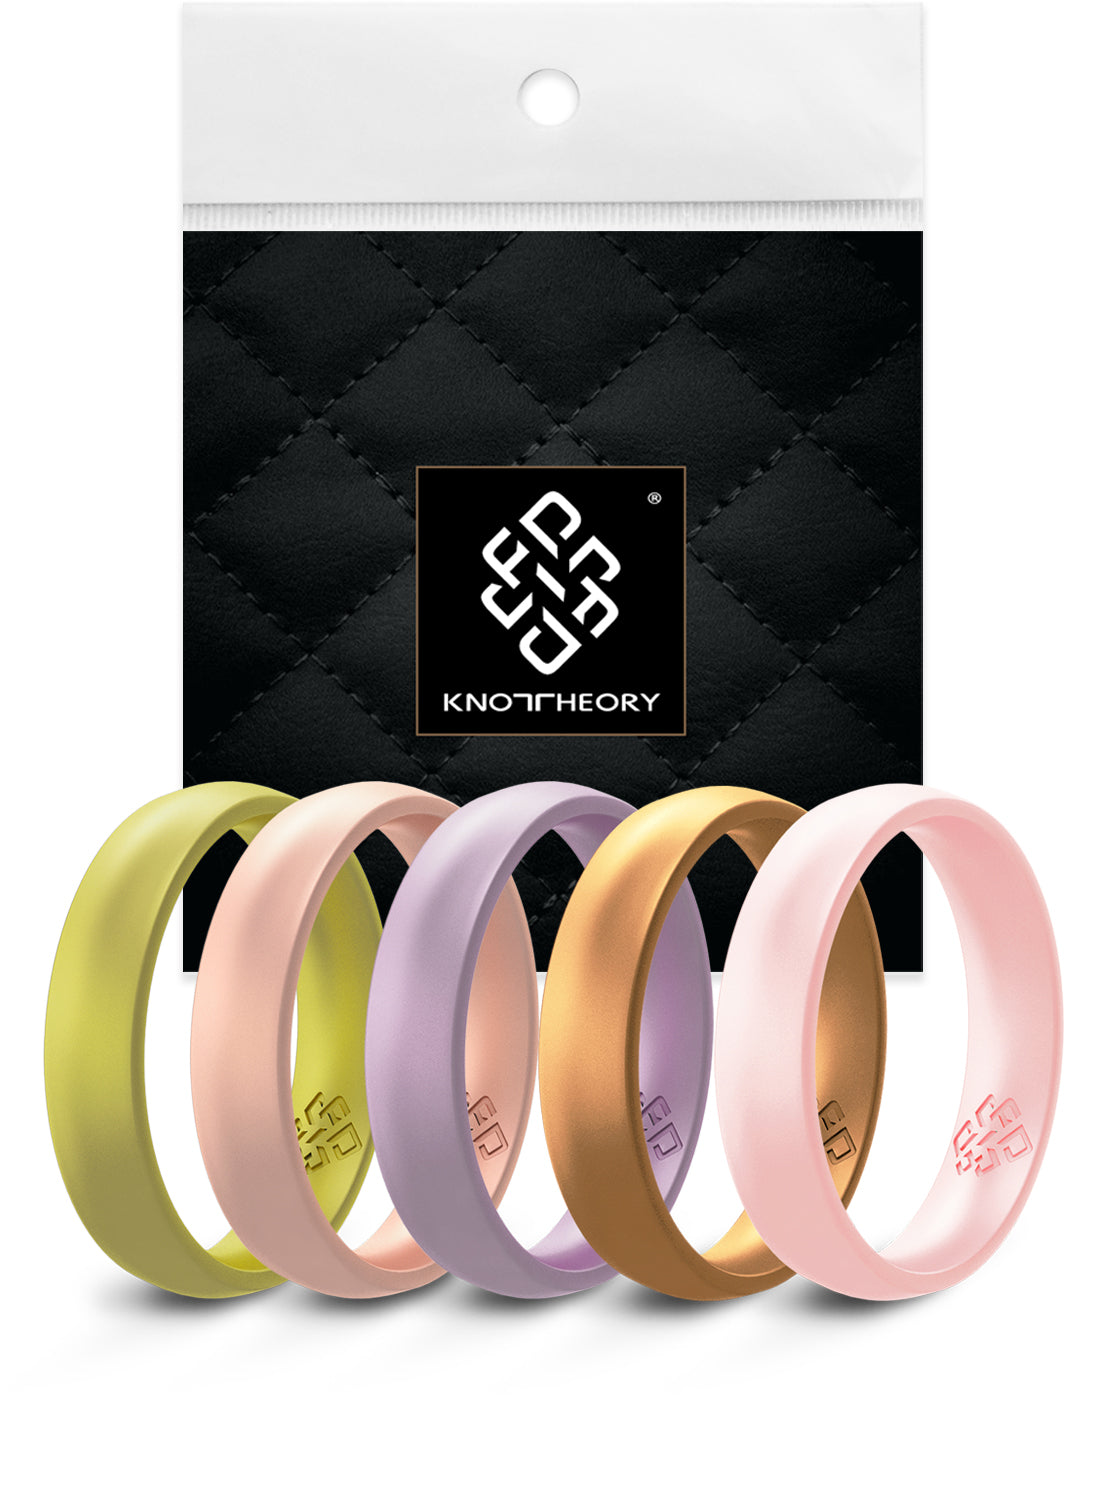 Lotus 5-Pack Breathable Silicone Ring For Women